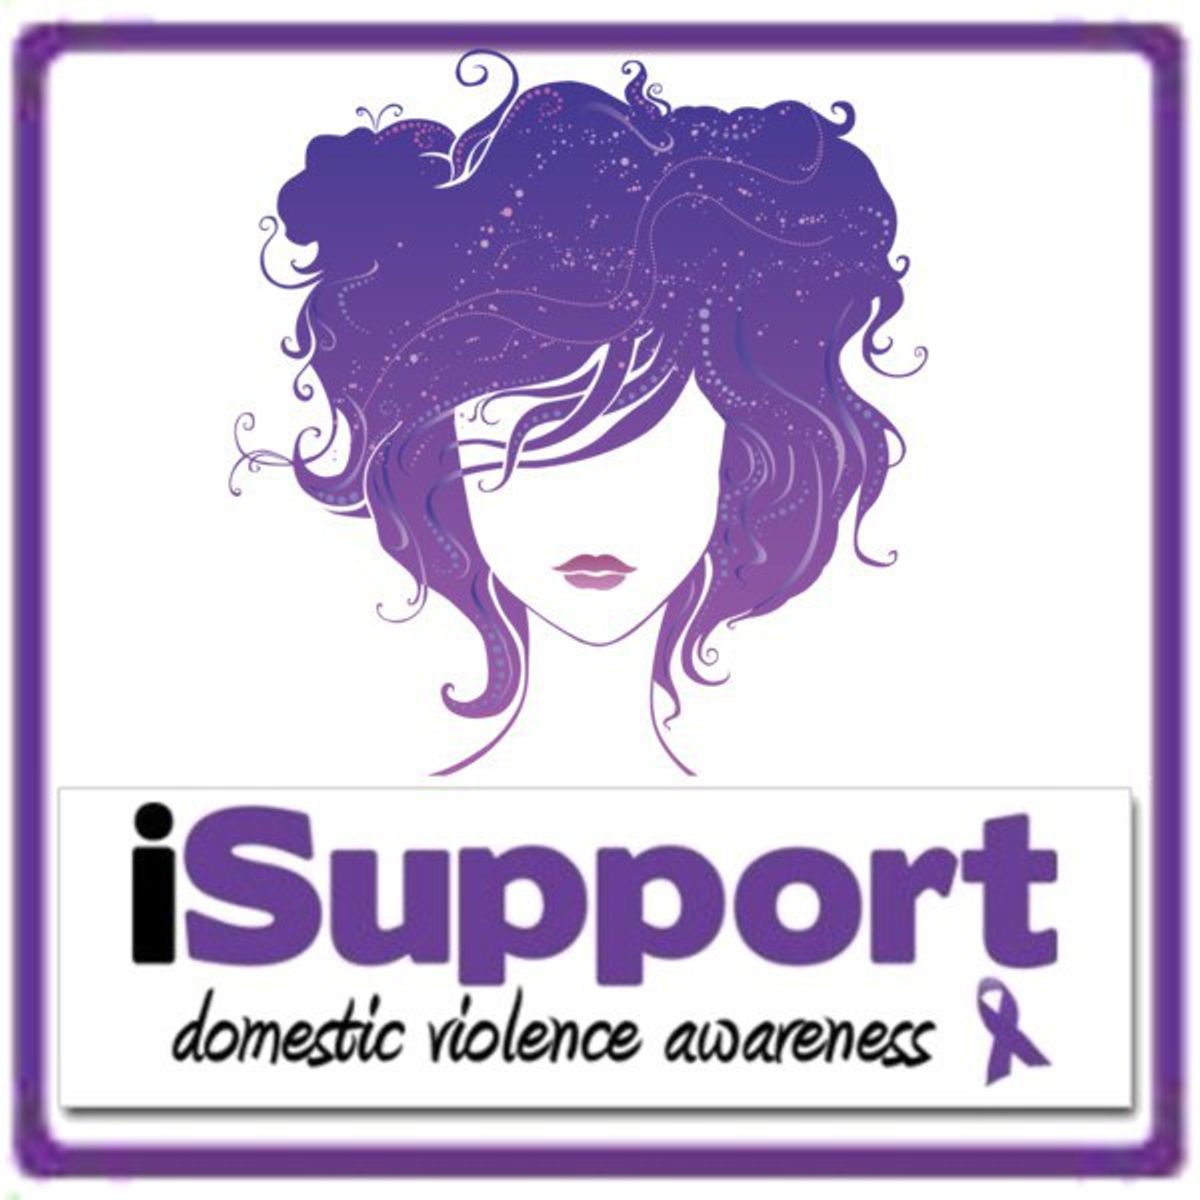 October Is Domestic Violence Awareness Month: Let's Not Forget...